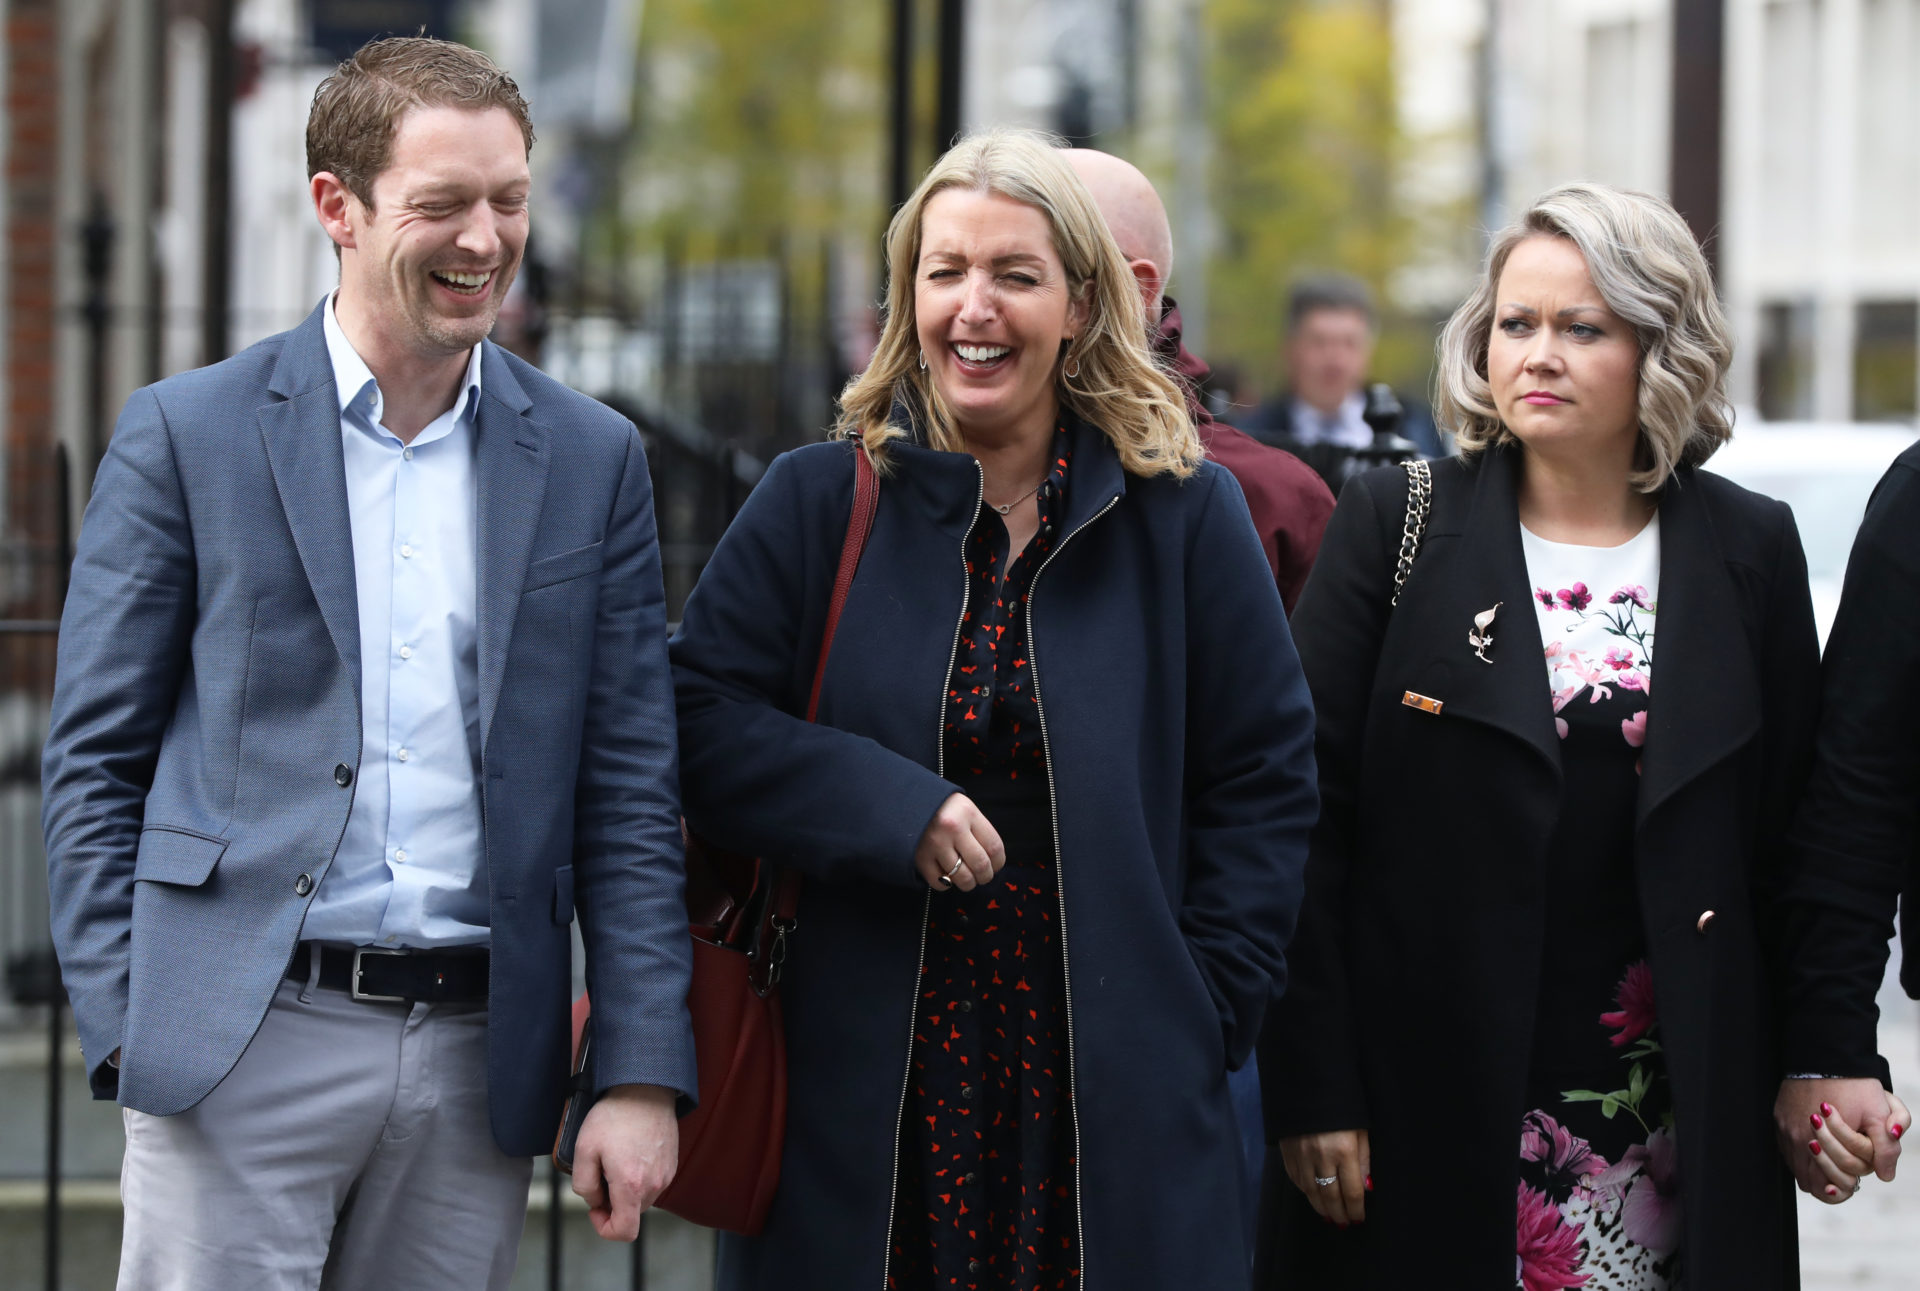 Stephen Teap, Vicky Phelan and Lorraine Walsh on their way into the Dáil to hear the Taoiseach apologise to the victims of the CervicalCheck scandal